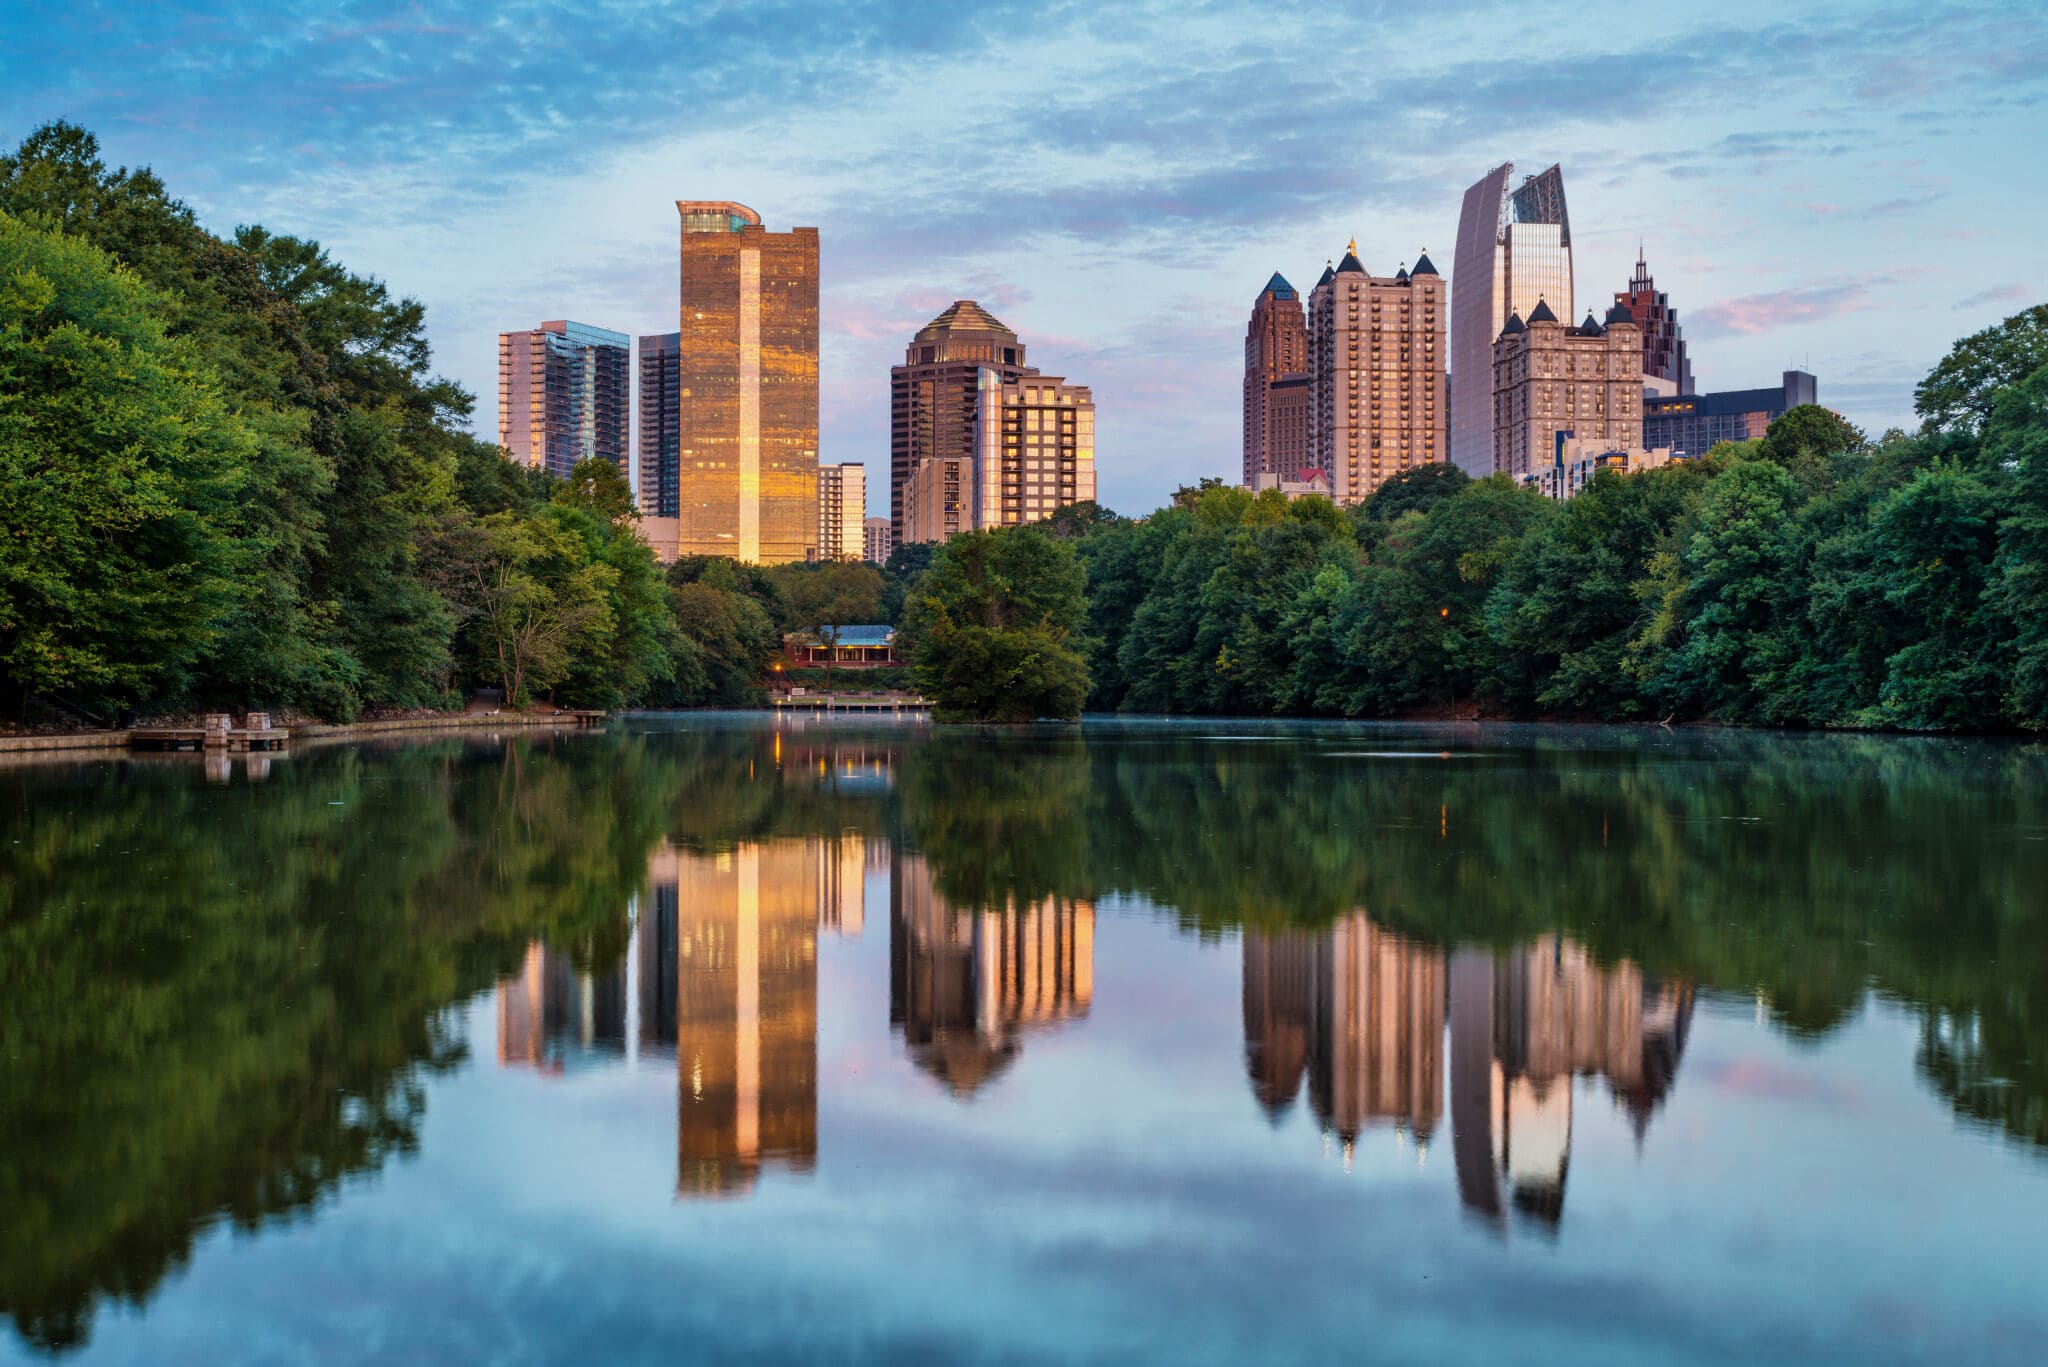 Atlanta listed as one of the 'most neighborly' cities in the U.S.